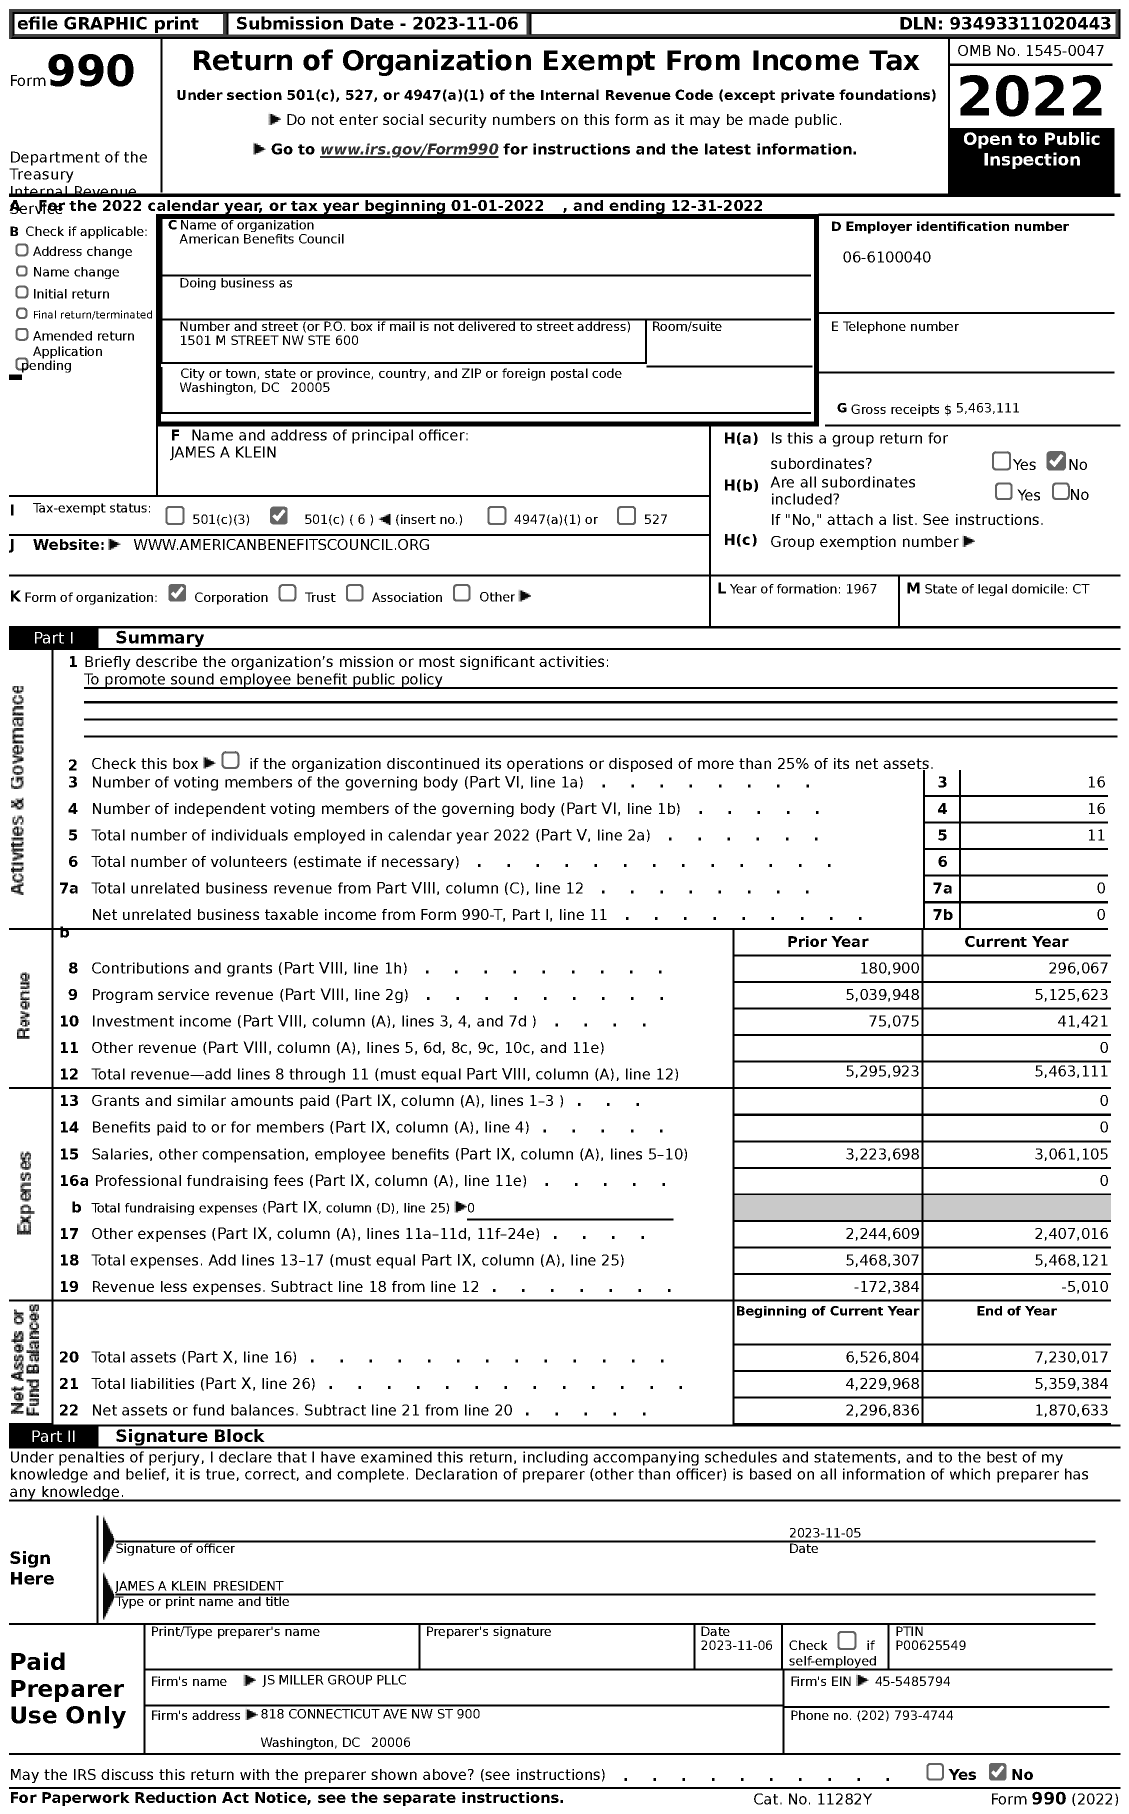 Image of first page of 2022 Form 990 for American Benefits Council